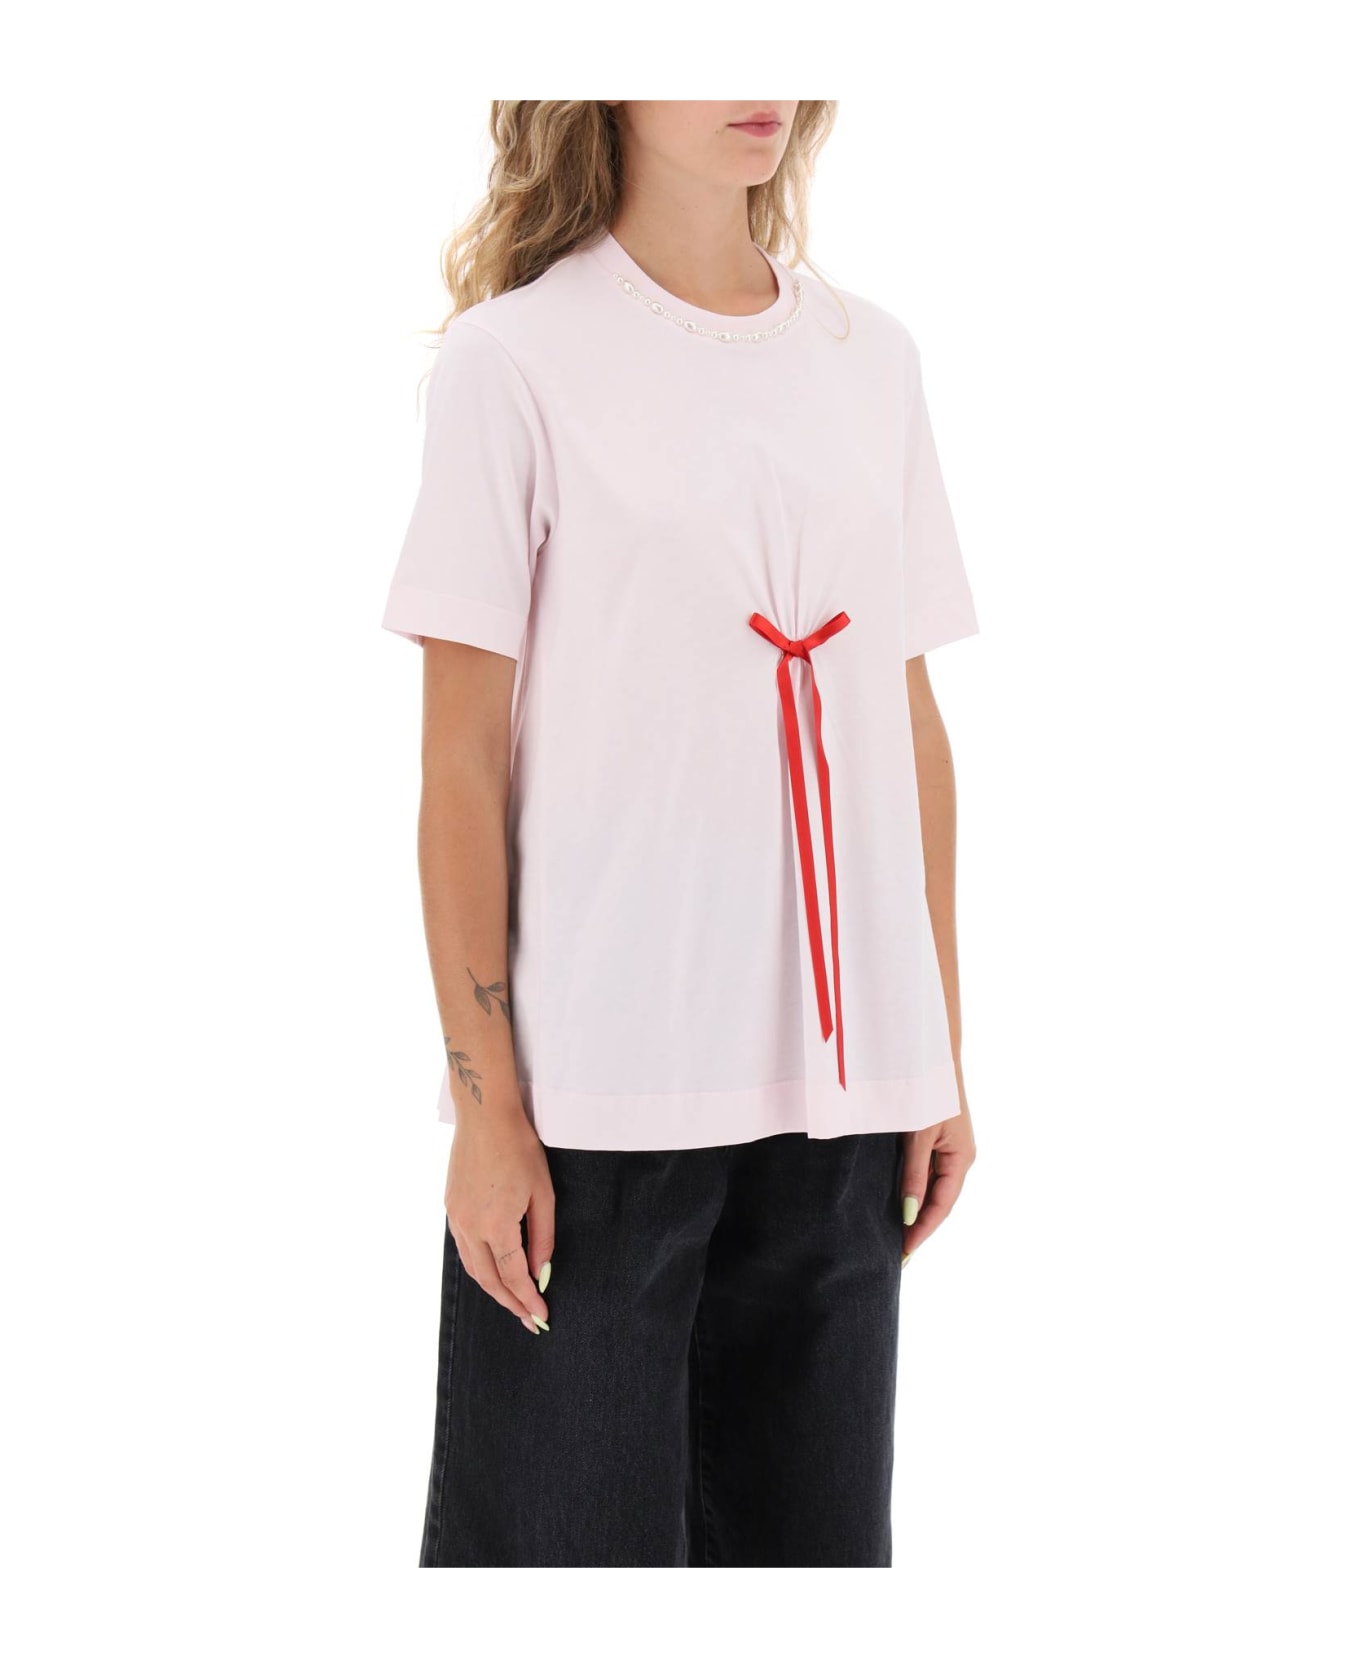 Simone Rocha A-line T-shirt With Bow Detail - PINK RED PEARL (Pink)